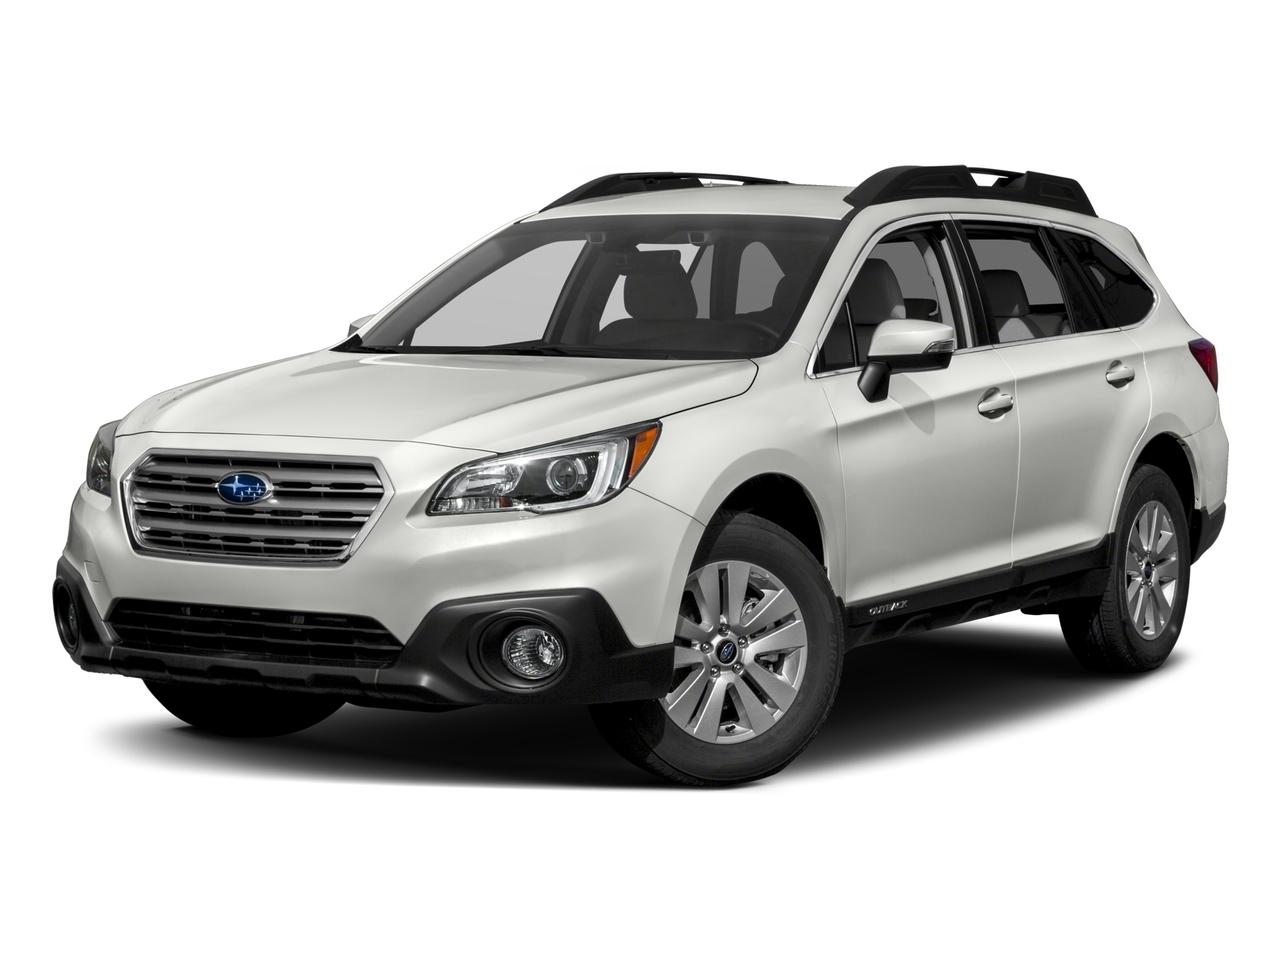 Used 2017 Subaru Outback Premium with VIN 4S4BSACC0H3281530 for sale in Foley, Minnesota